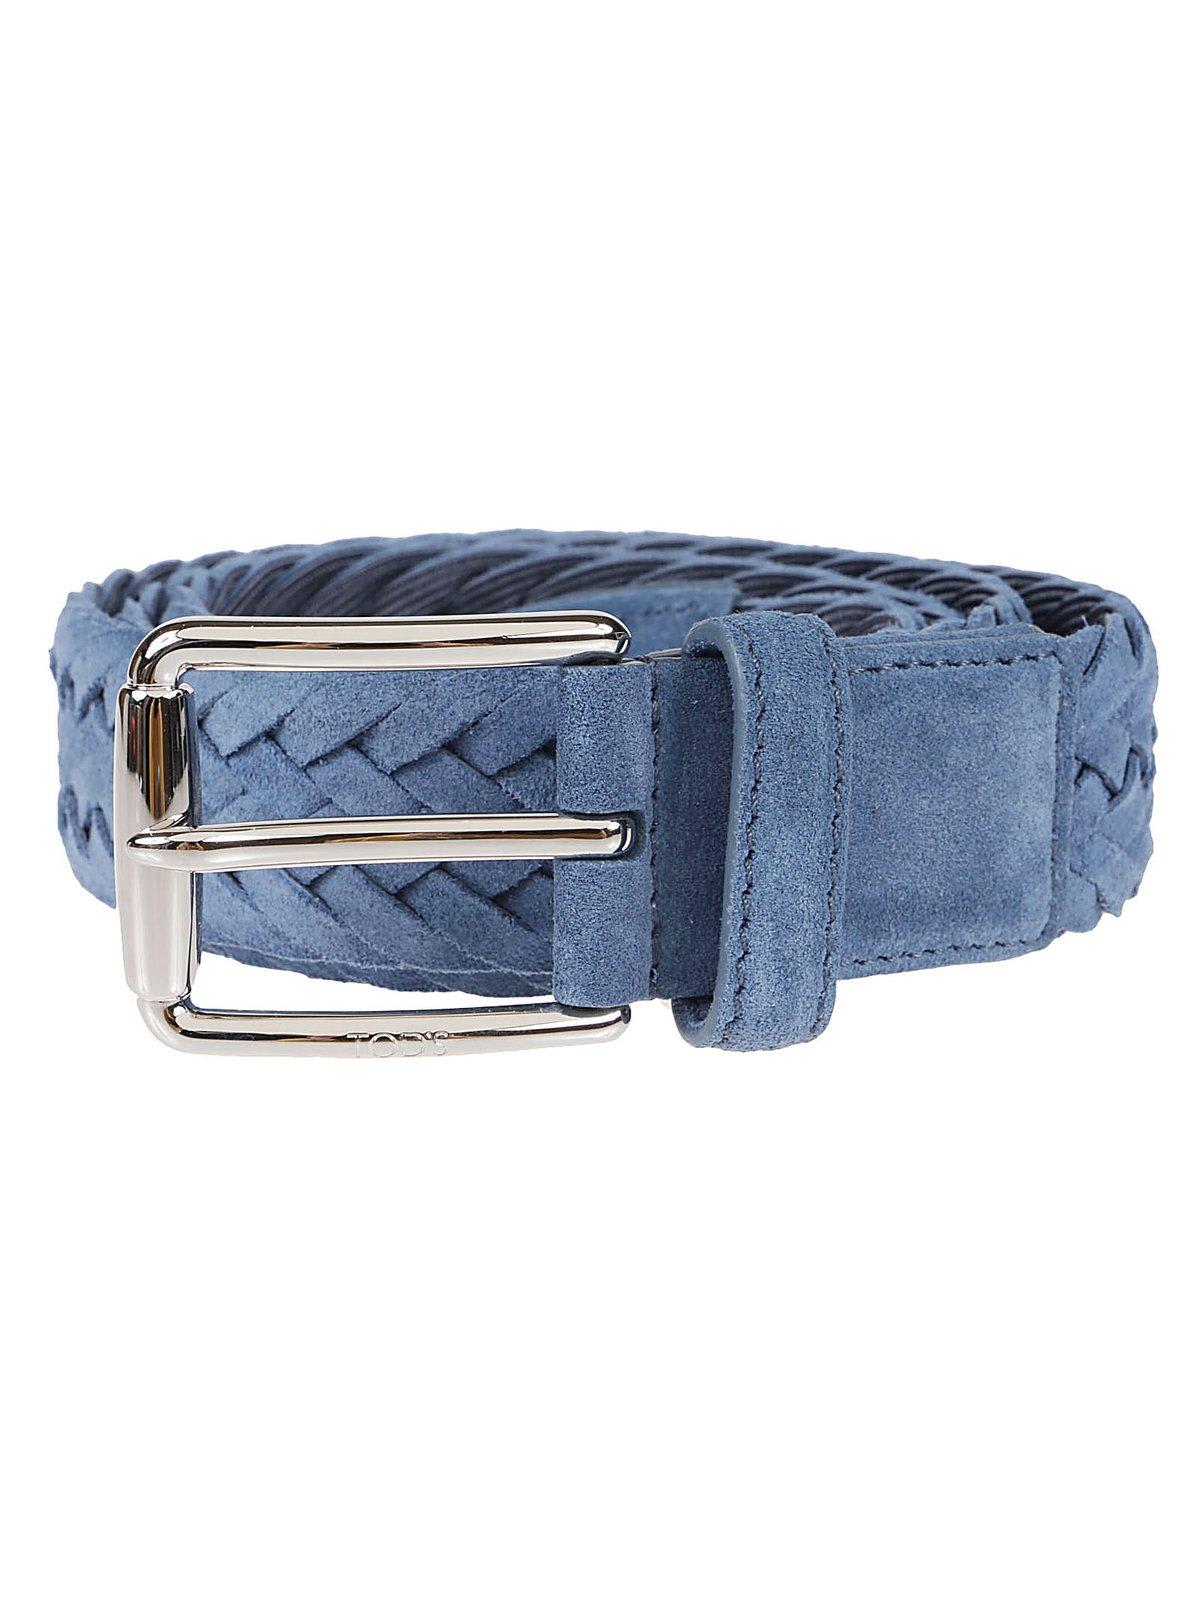 TOD'S BRAIDED BUCKLED BELT